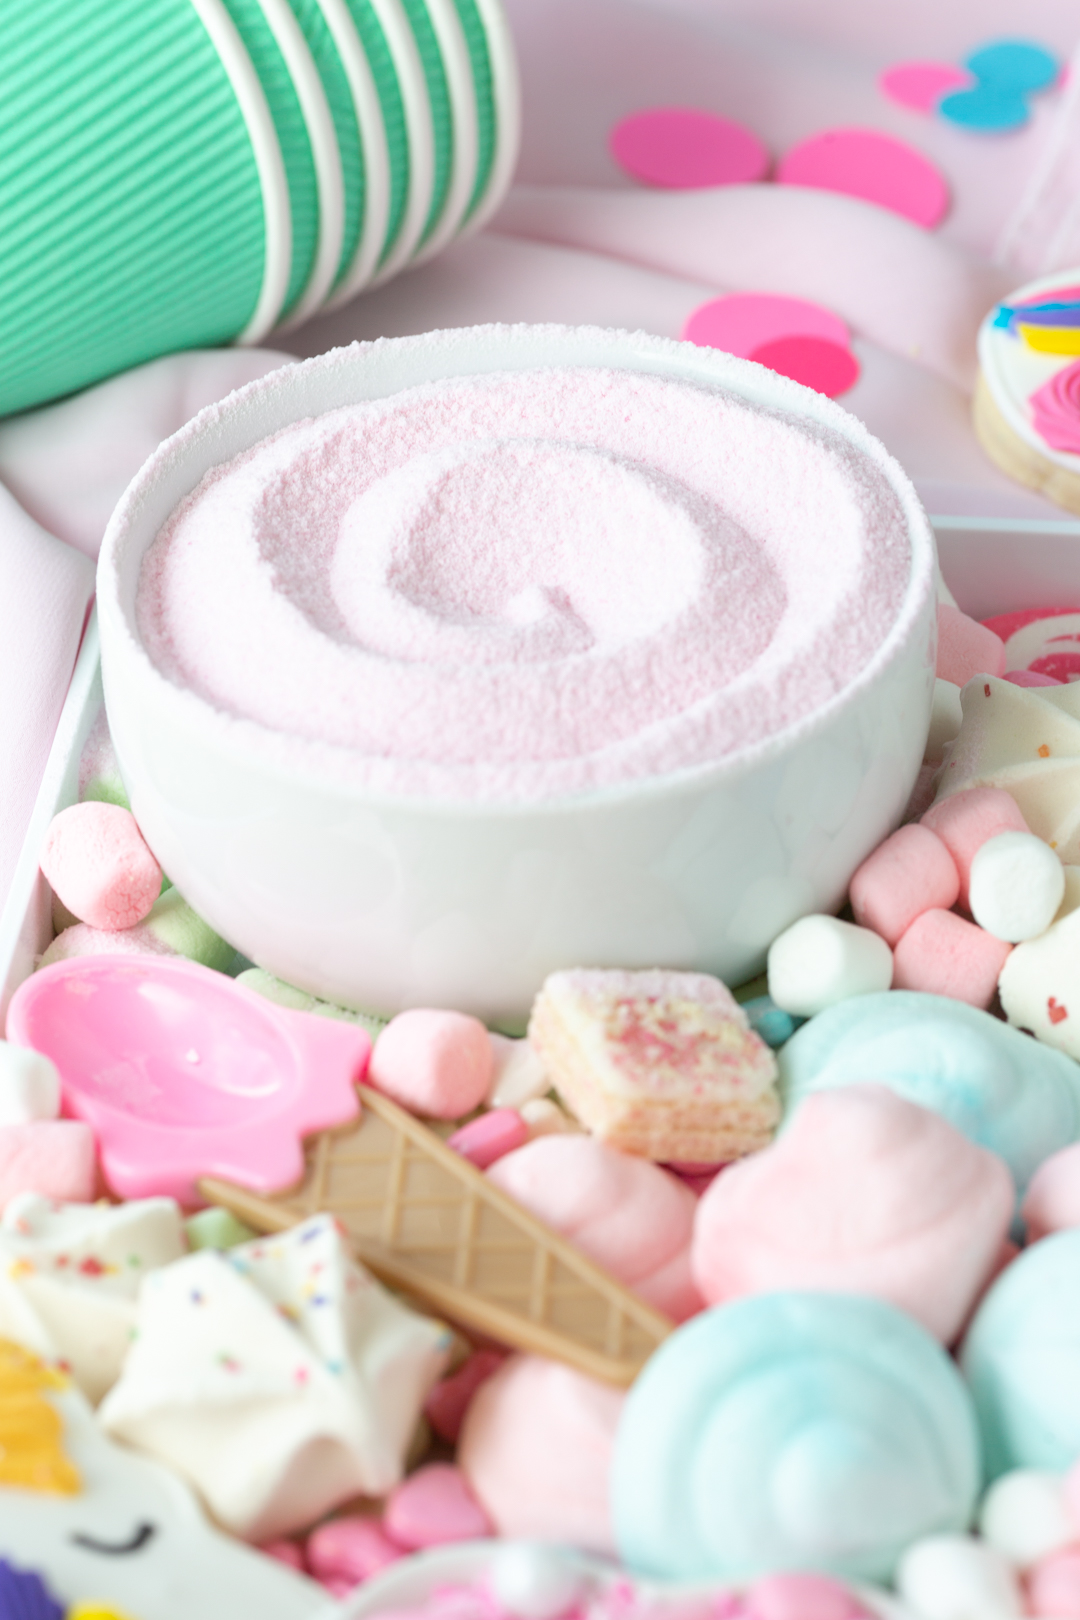 close up view of bowl of pink hot cocoa along with ice cream themed spoon and a variety of marshmallows and small pastel candies